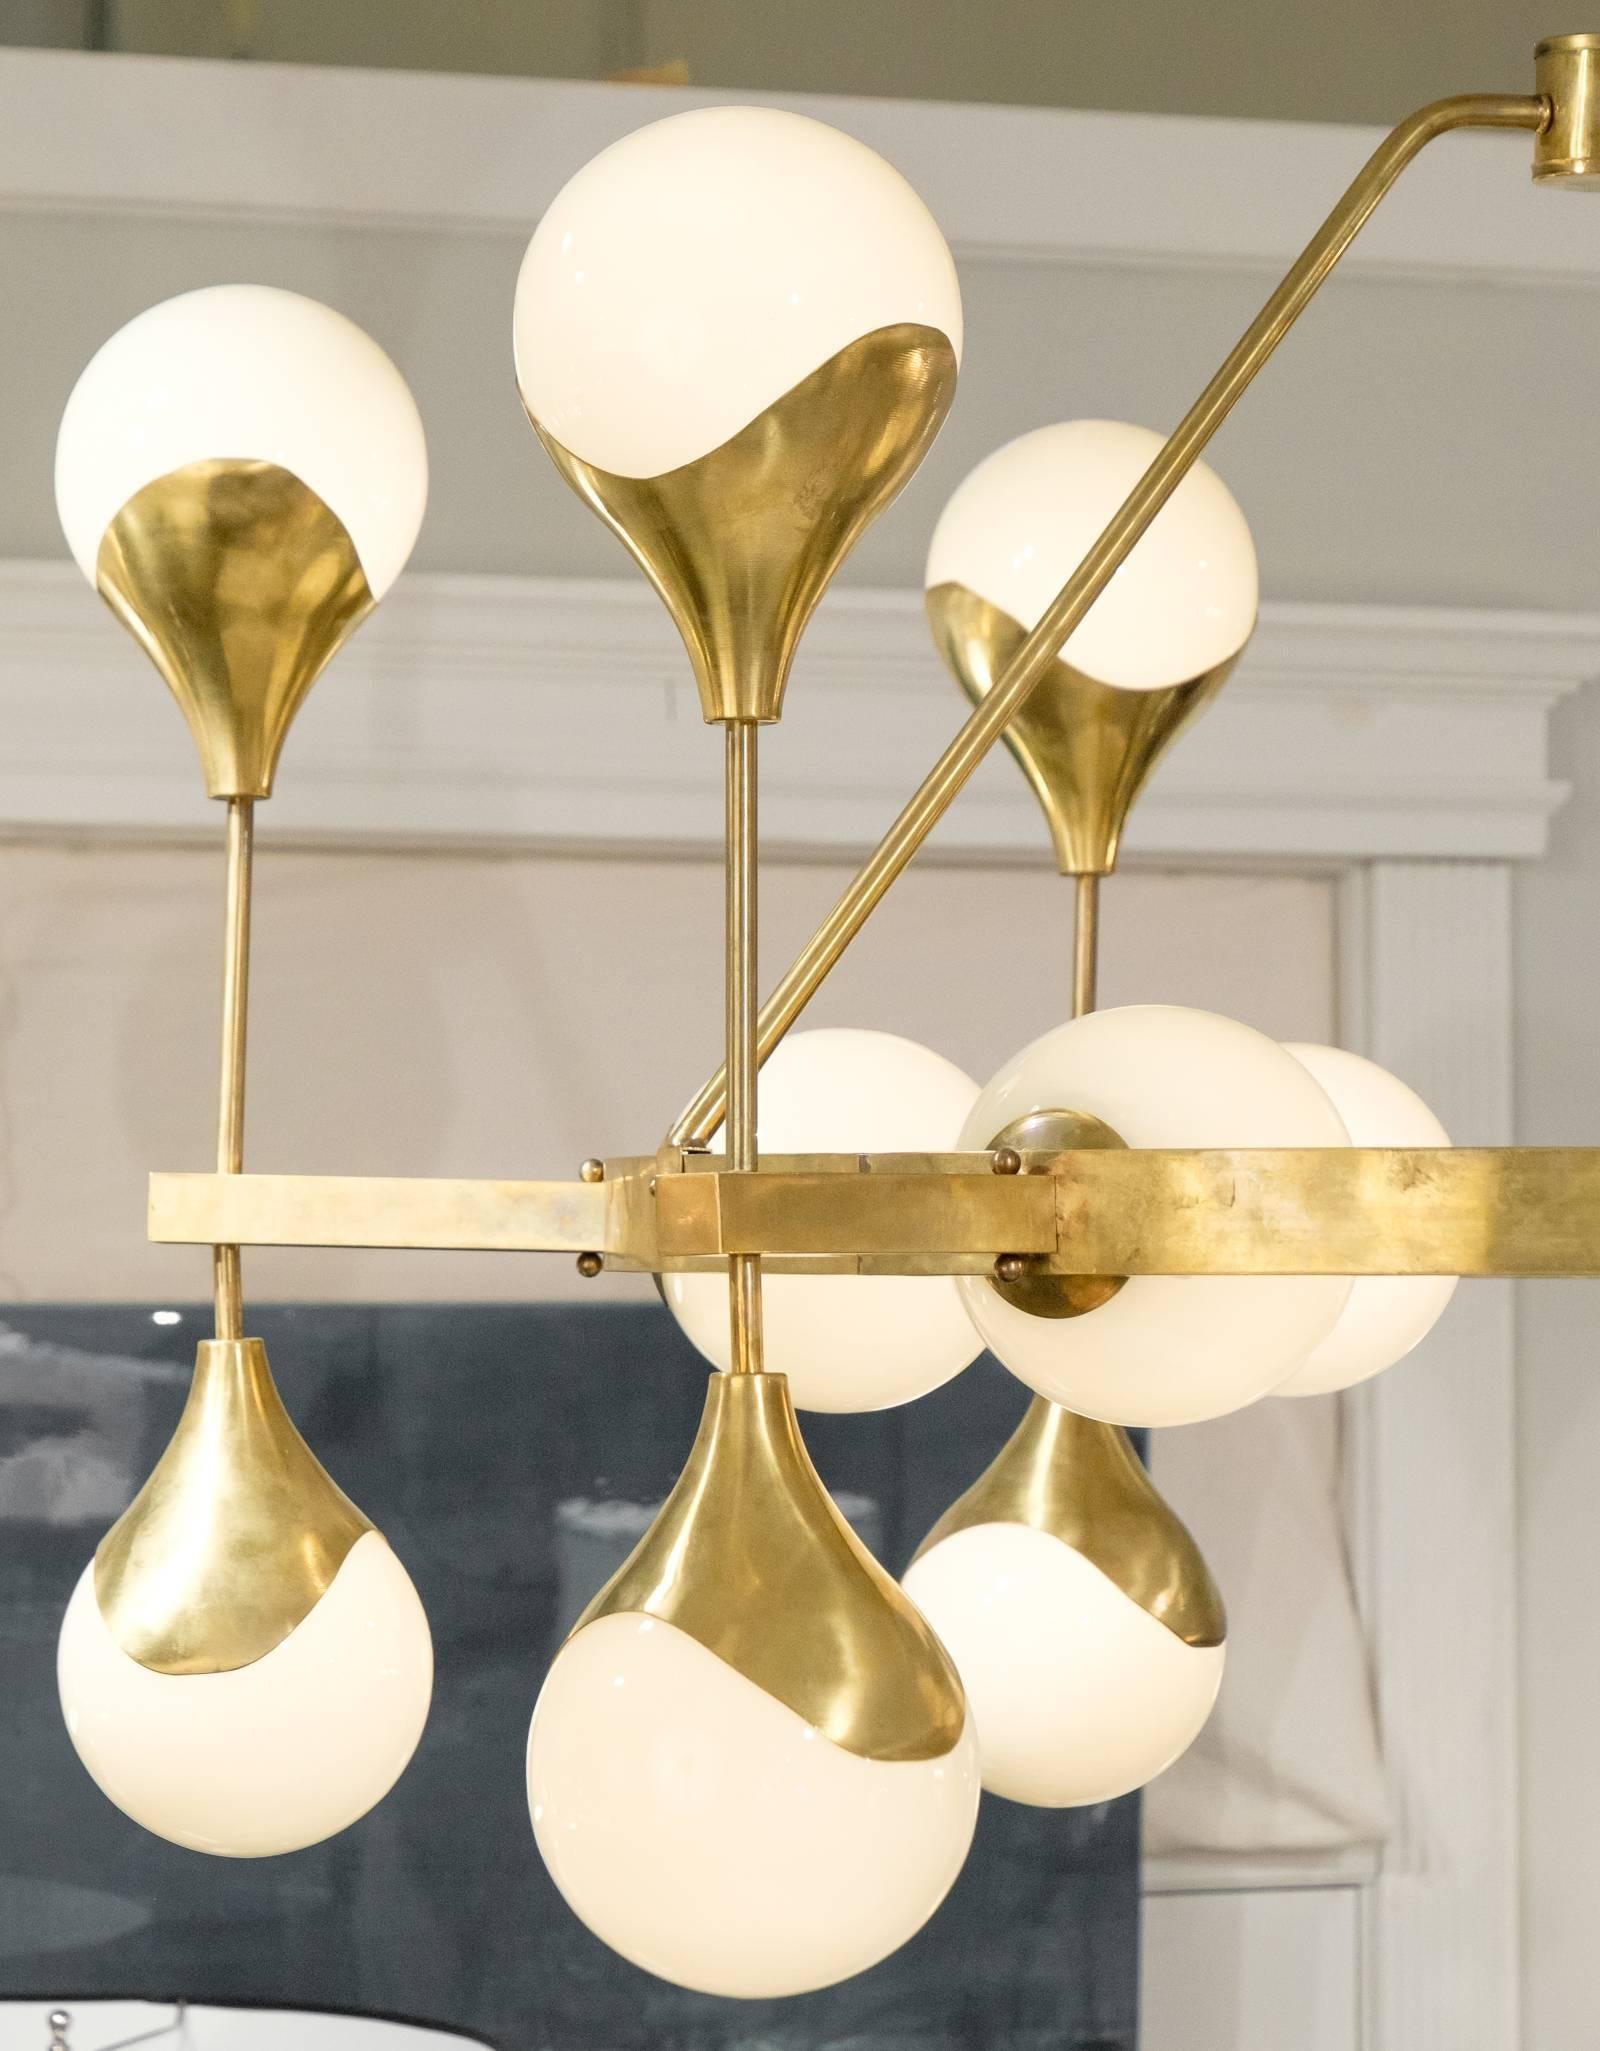 Murano Globe Glass and Textured Brass Chandelier In Excellent Condition For Sale In Austin, TX